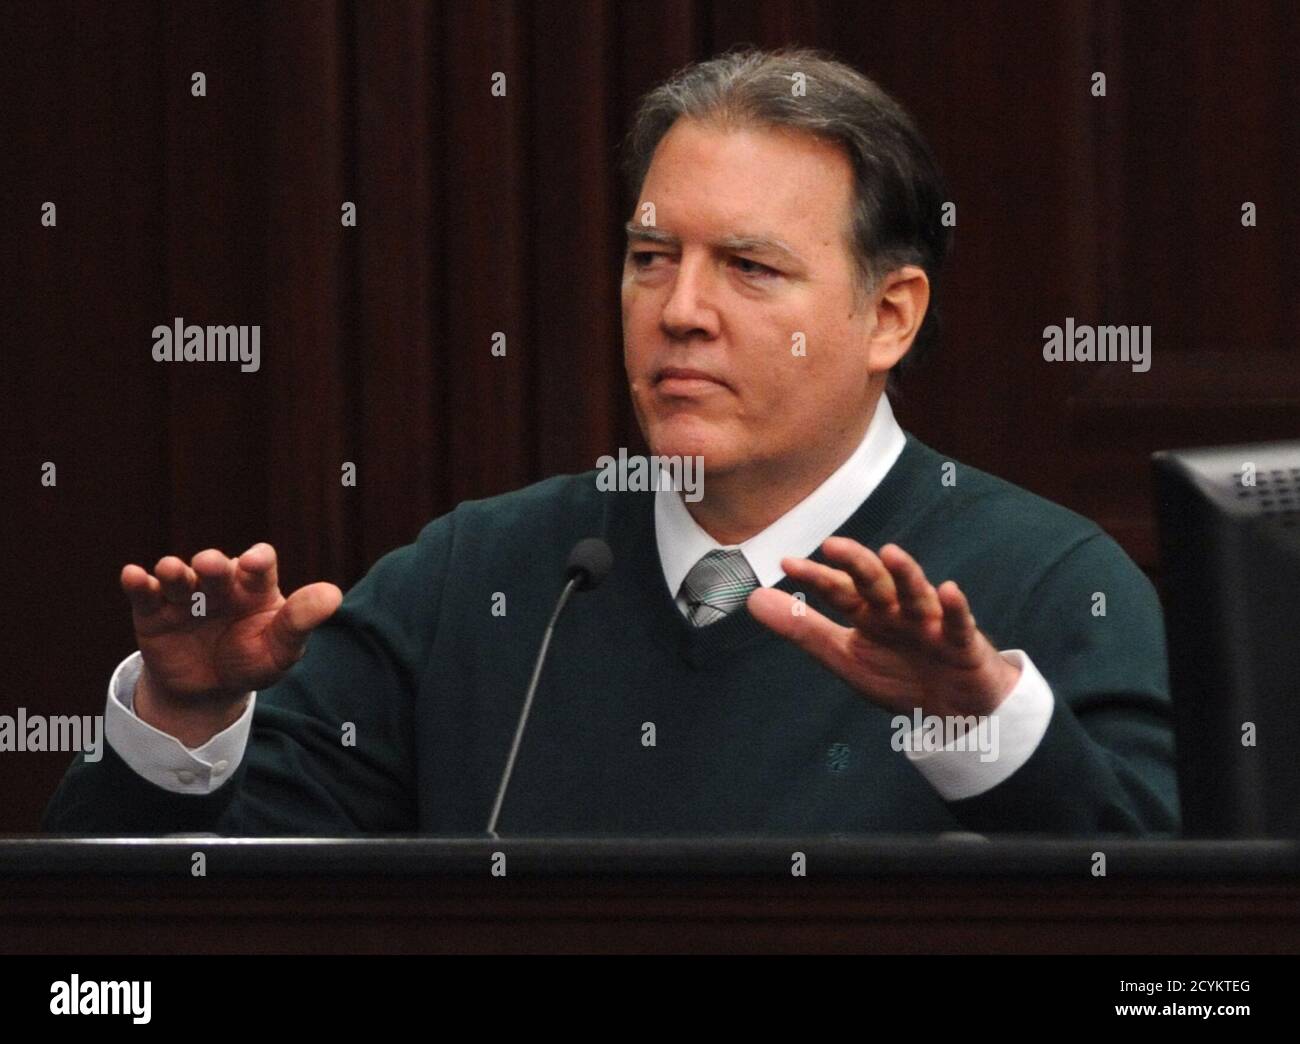 Defendant Michael Dunn gestures on the stand during testimony in his own defense during his murder trial in Duval County Courthouse in Jacksonville, Florida February 11, 2014. Dunn is accused of first degree murder in the death of unarmed teenager Jordan Davis after an altercation over loud rap music at a Florida gas station in November 2012.  REUTERS/Bob Mack/Pool   (UNITED STATES - Tags: CRIME LAW) Stock Photo